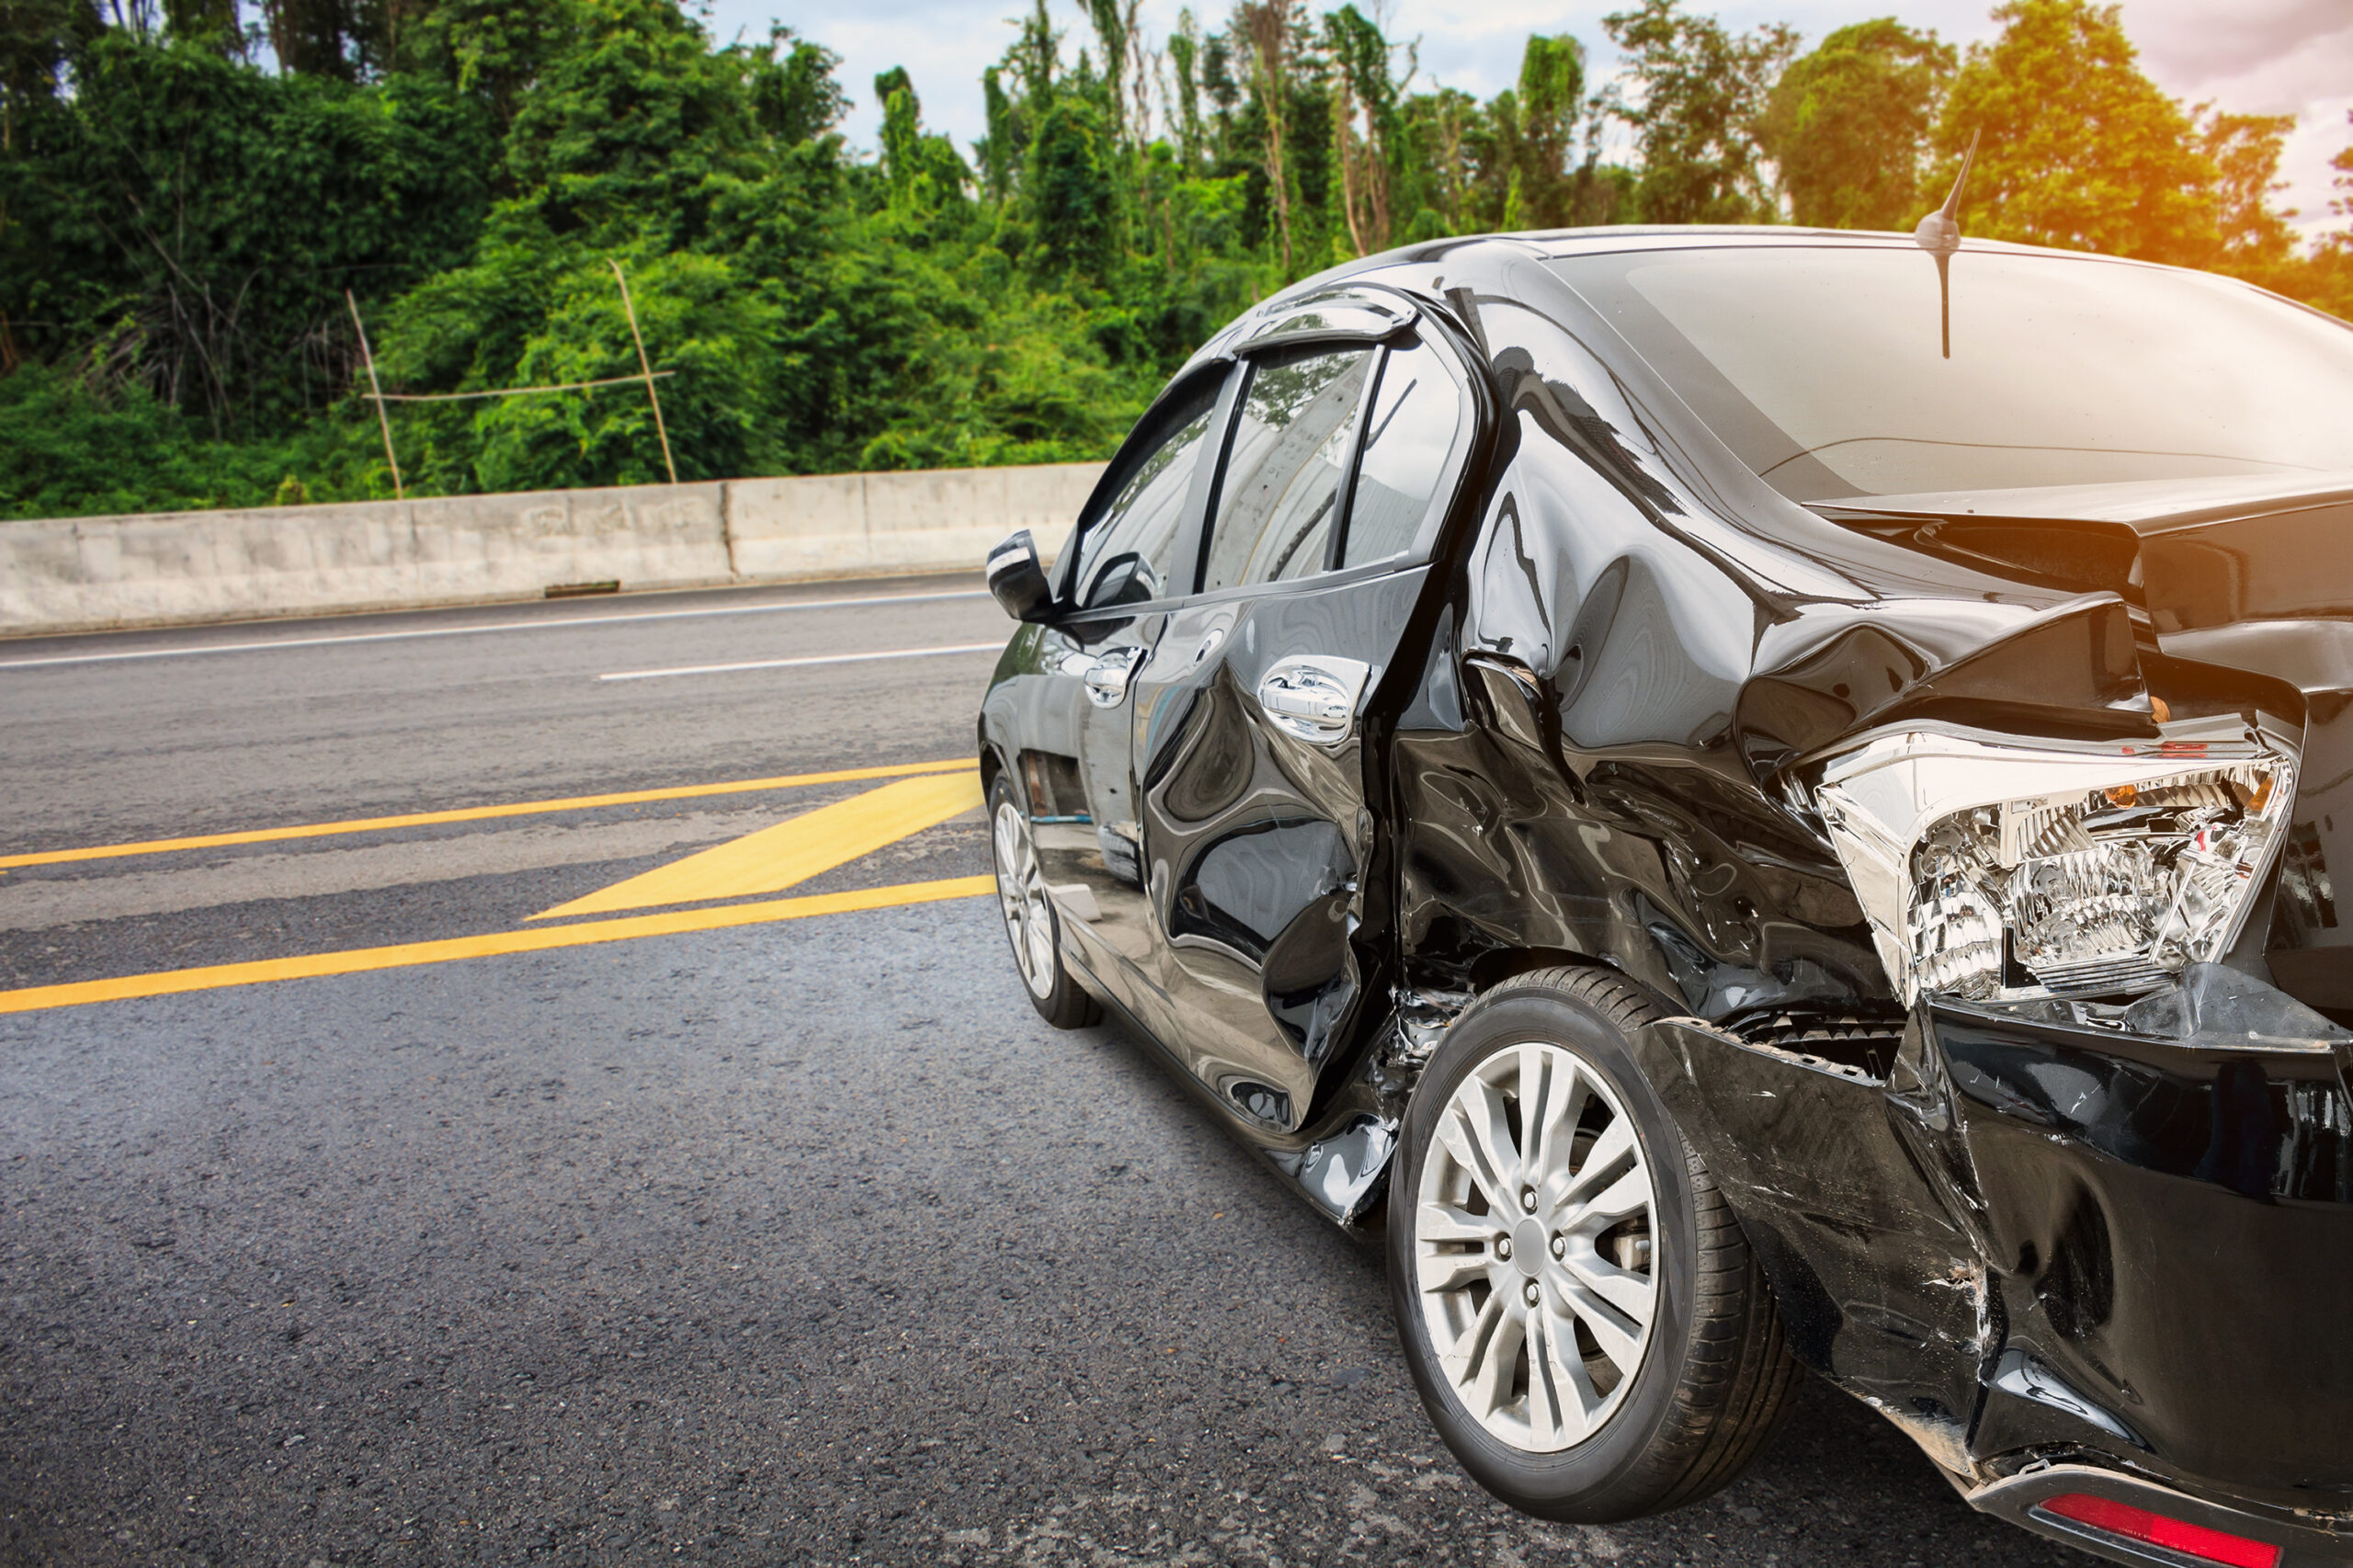 Common Types of Personal Injury Cases in Mobile